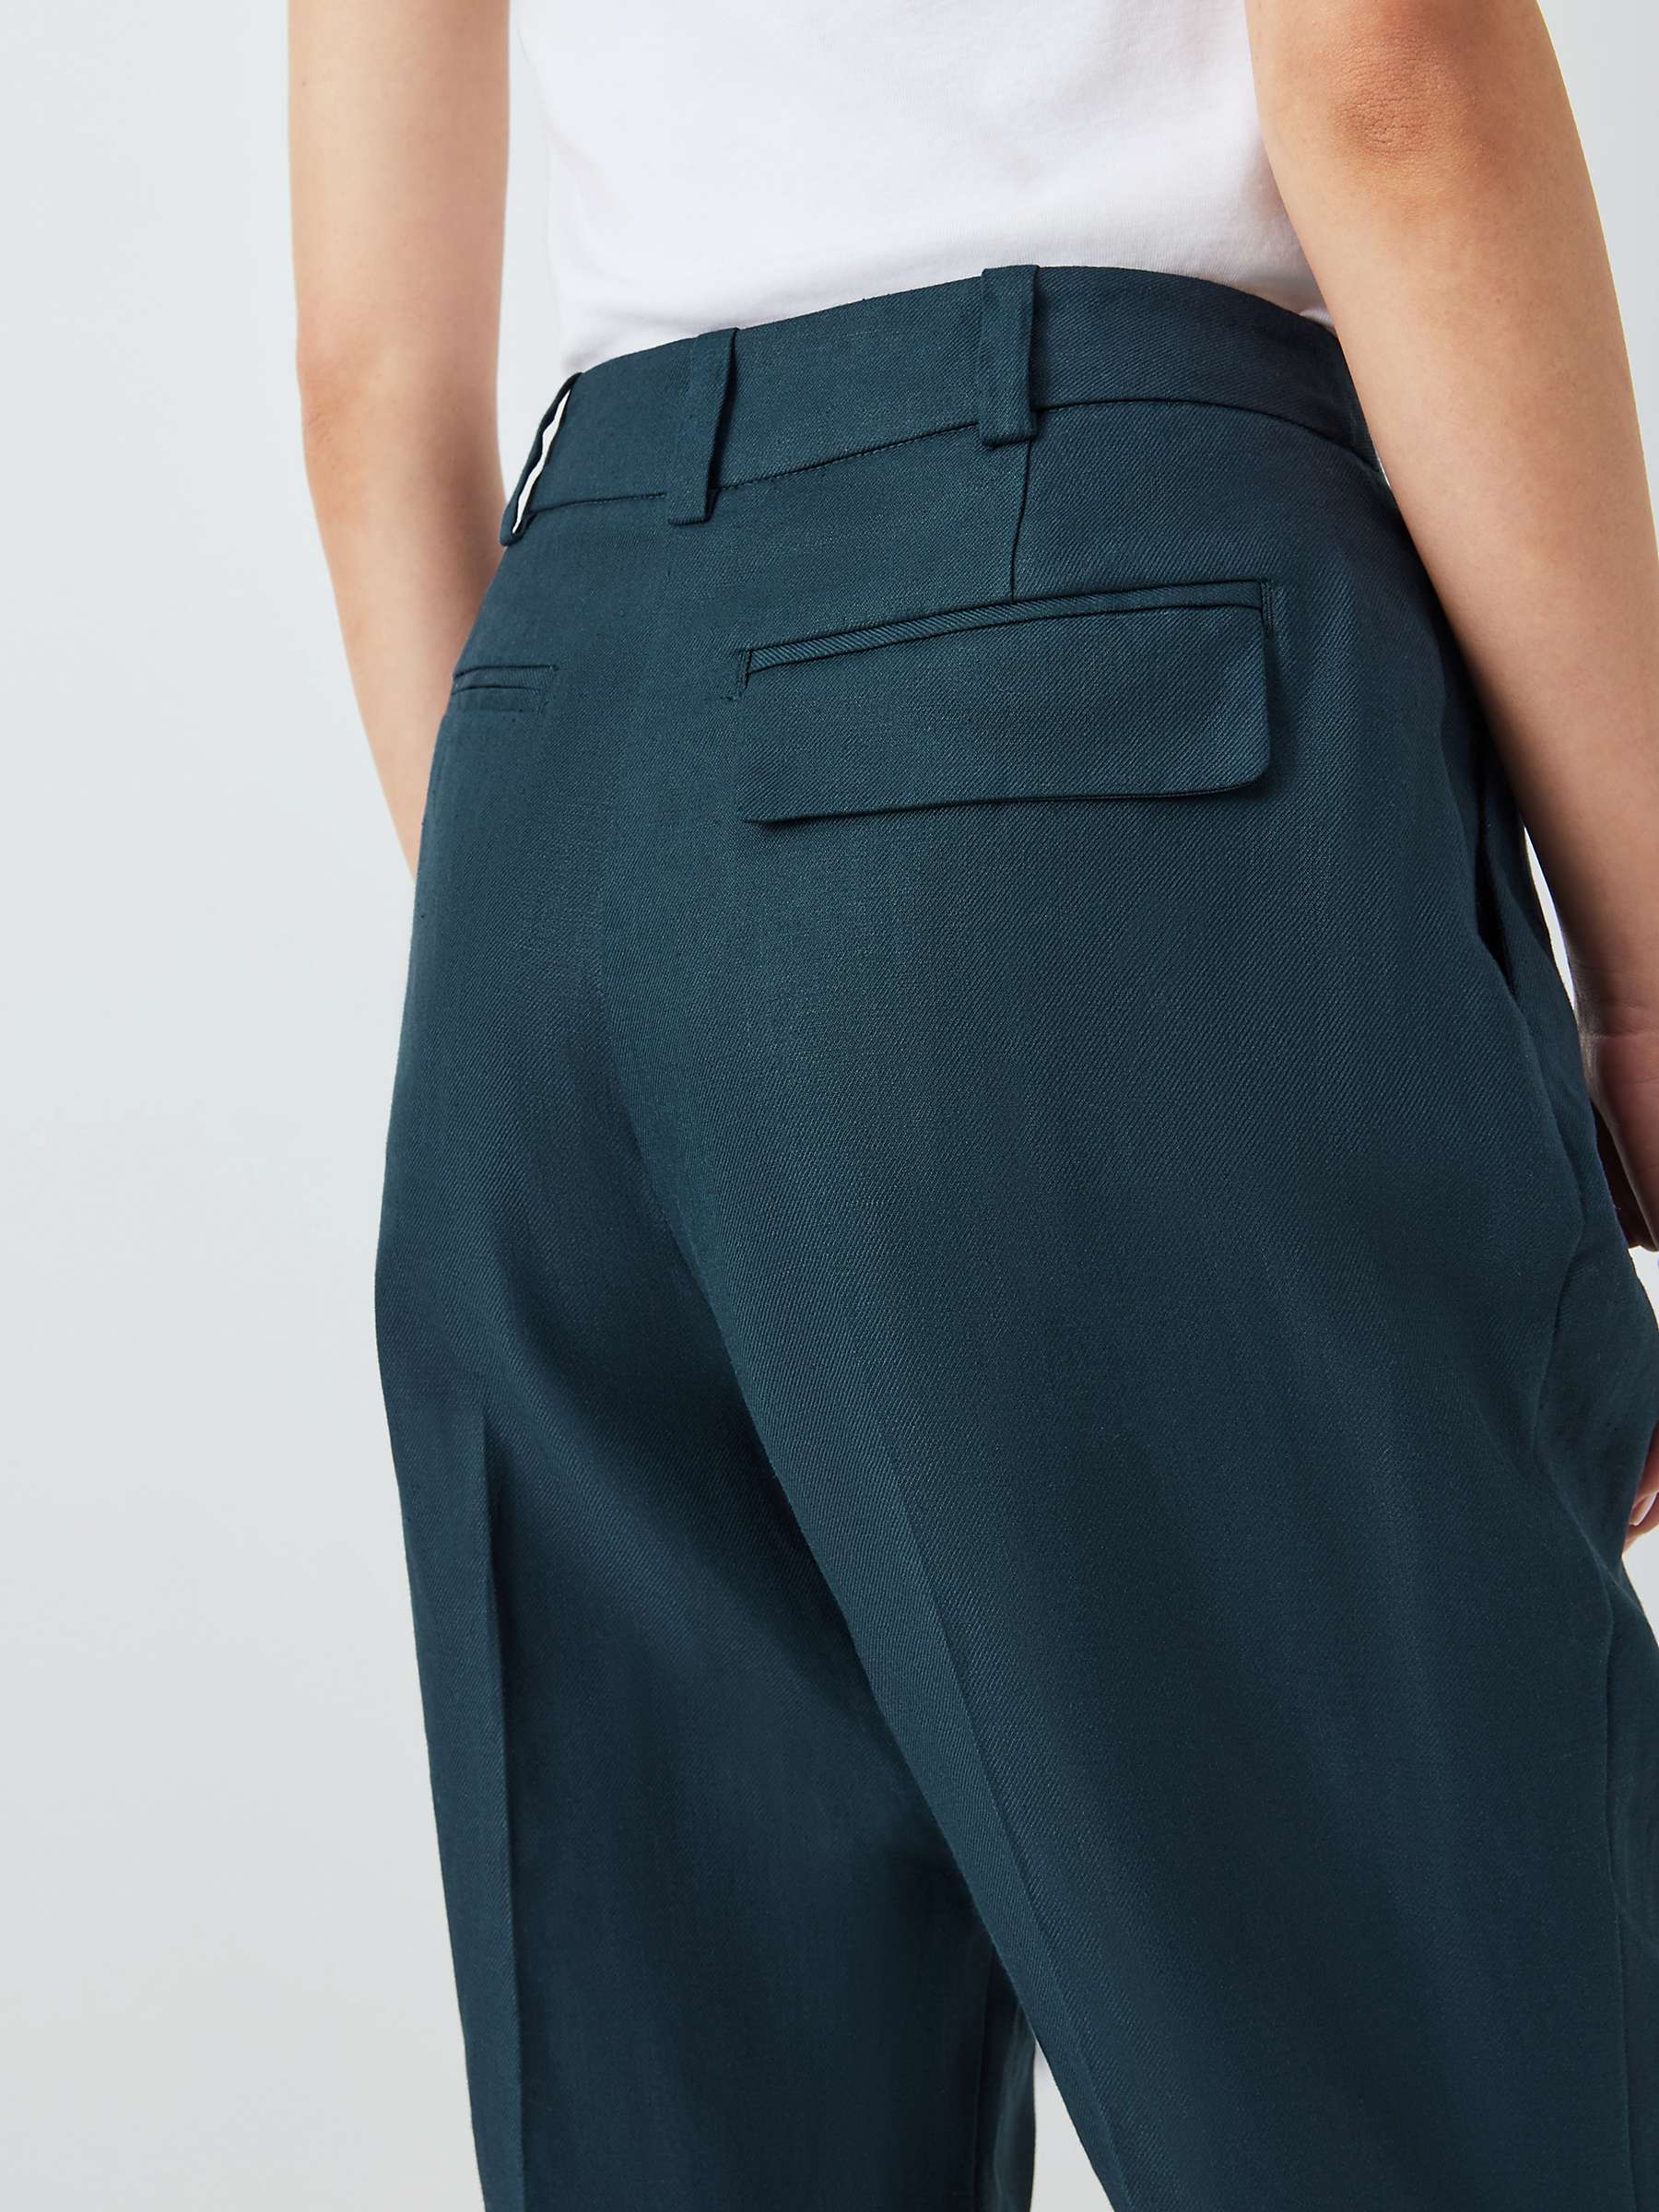 Buy John Lewis Tapered Linen Trousers Online at johnlewis.com